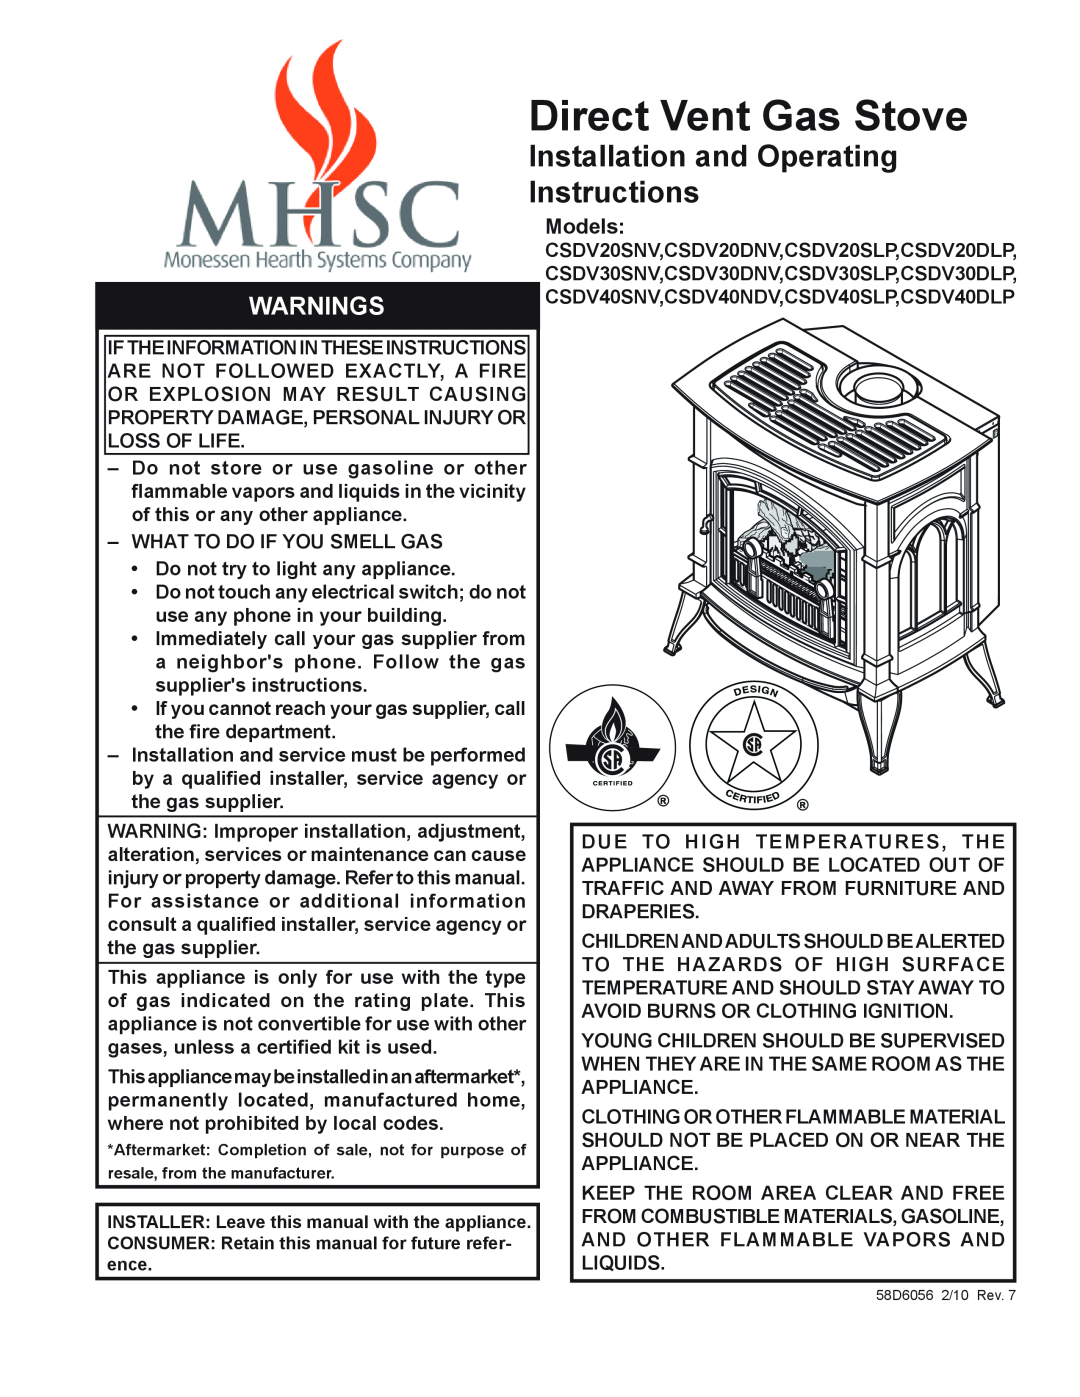 Monessen Hearth CSDV40SNV manual Models, Read Before Installing. Save These Instructions, Direct Vent Gas Stove, Warnings 